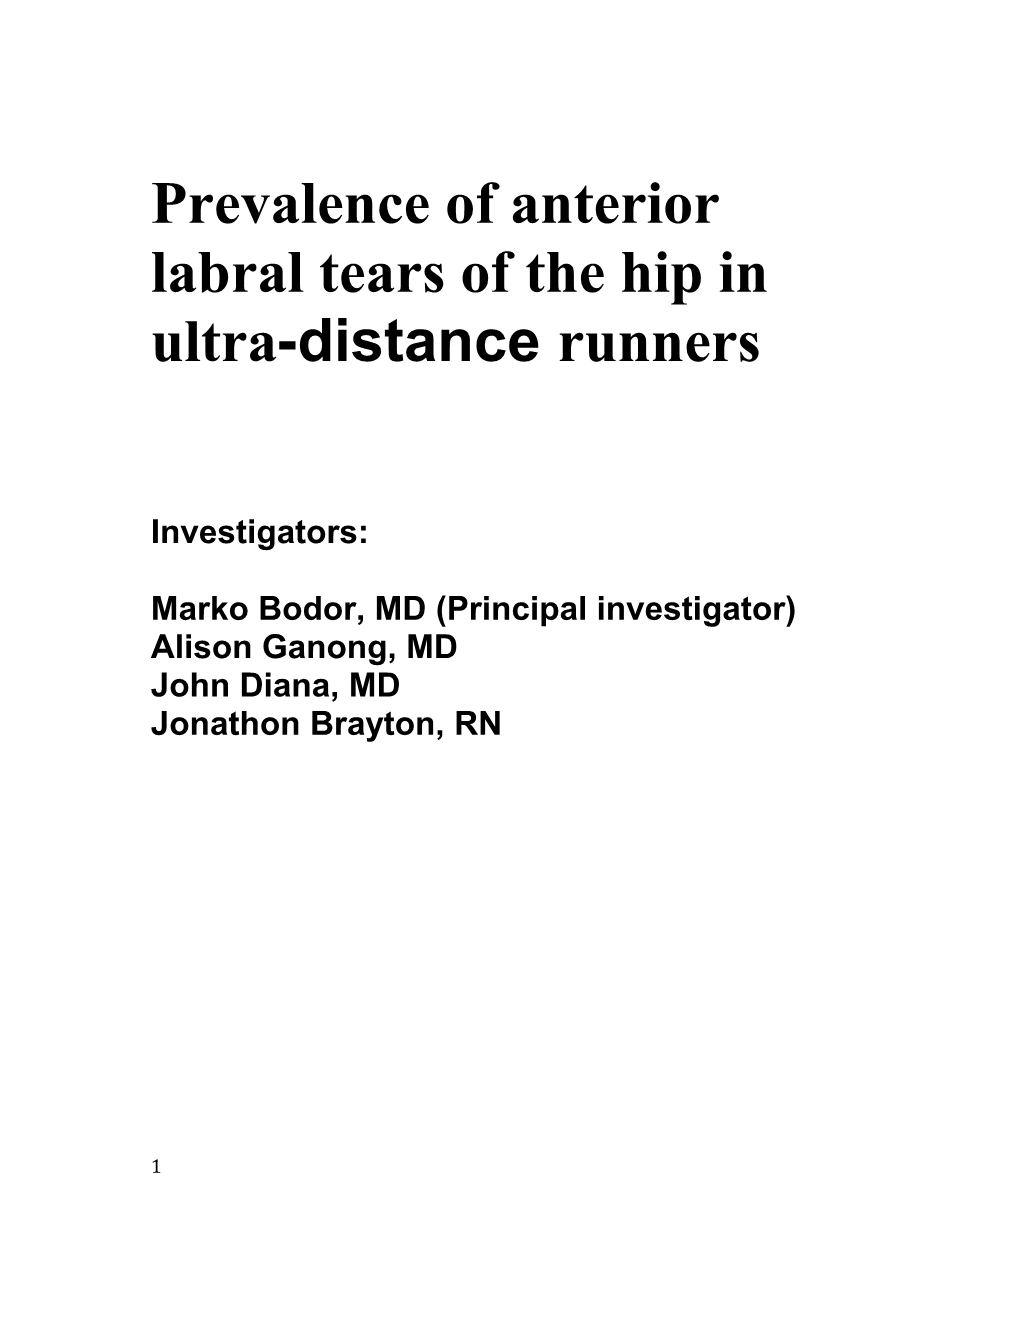 Prevalence of Anterior Labral Tears of the Hip in Ultra-Distancerunners